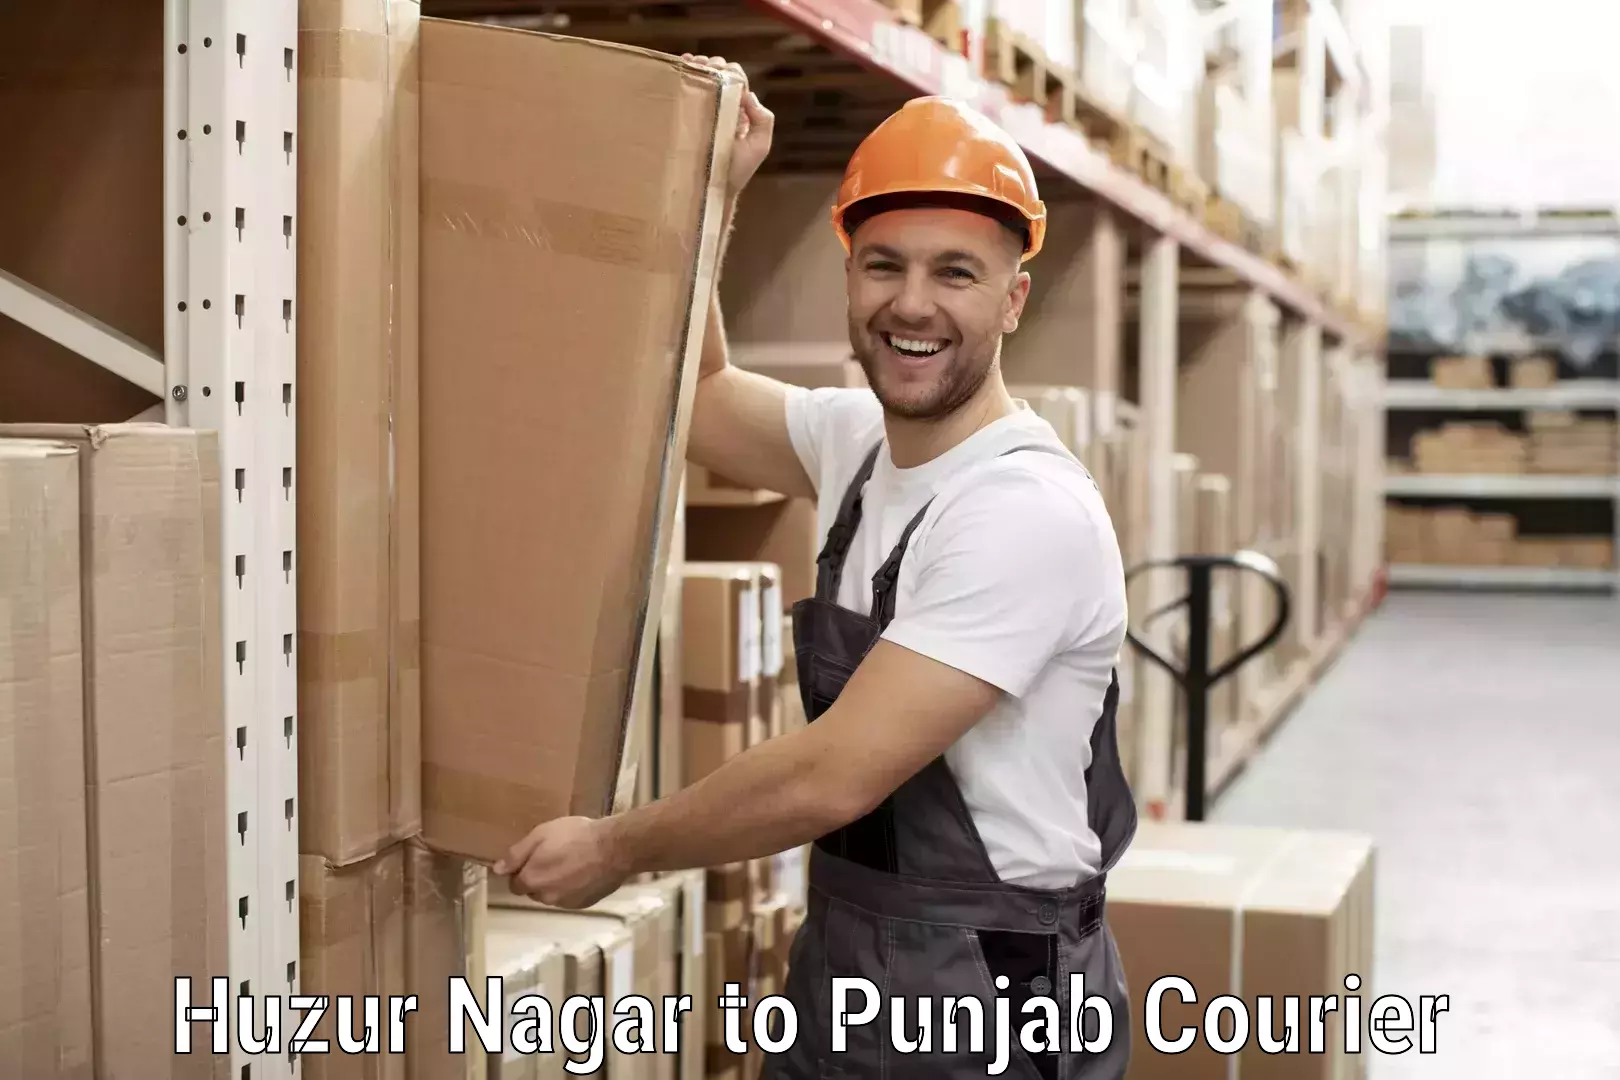 Global shipping networks Huzur Nagar to Thapar Institute of Engineering and Technology Patiala